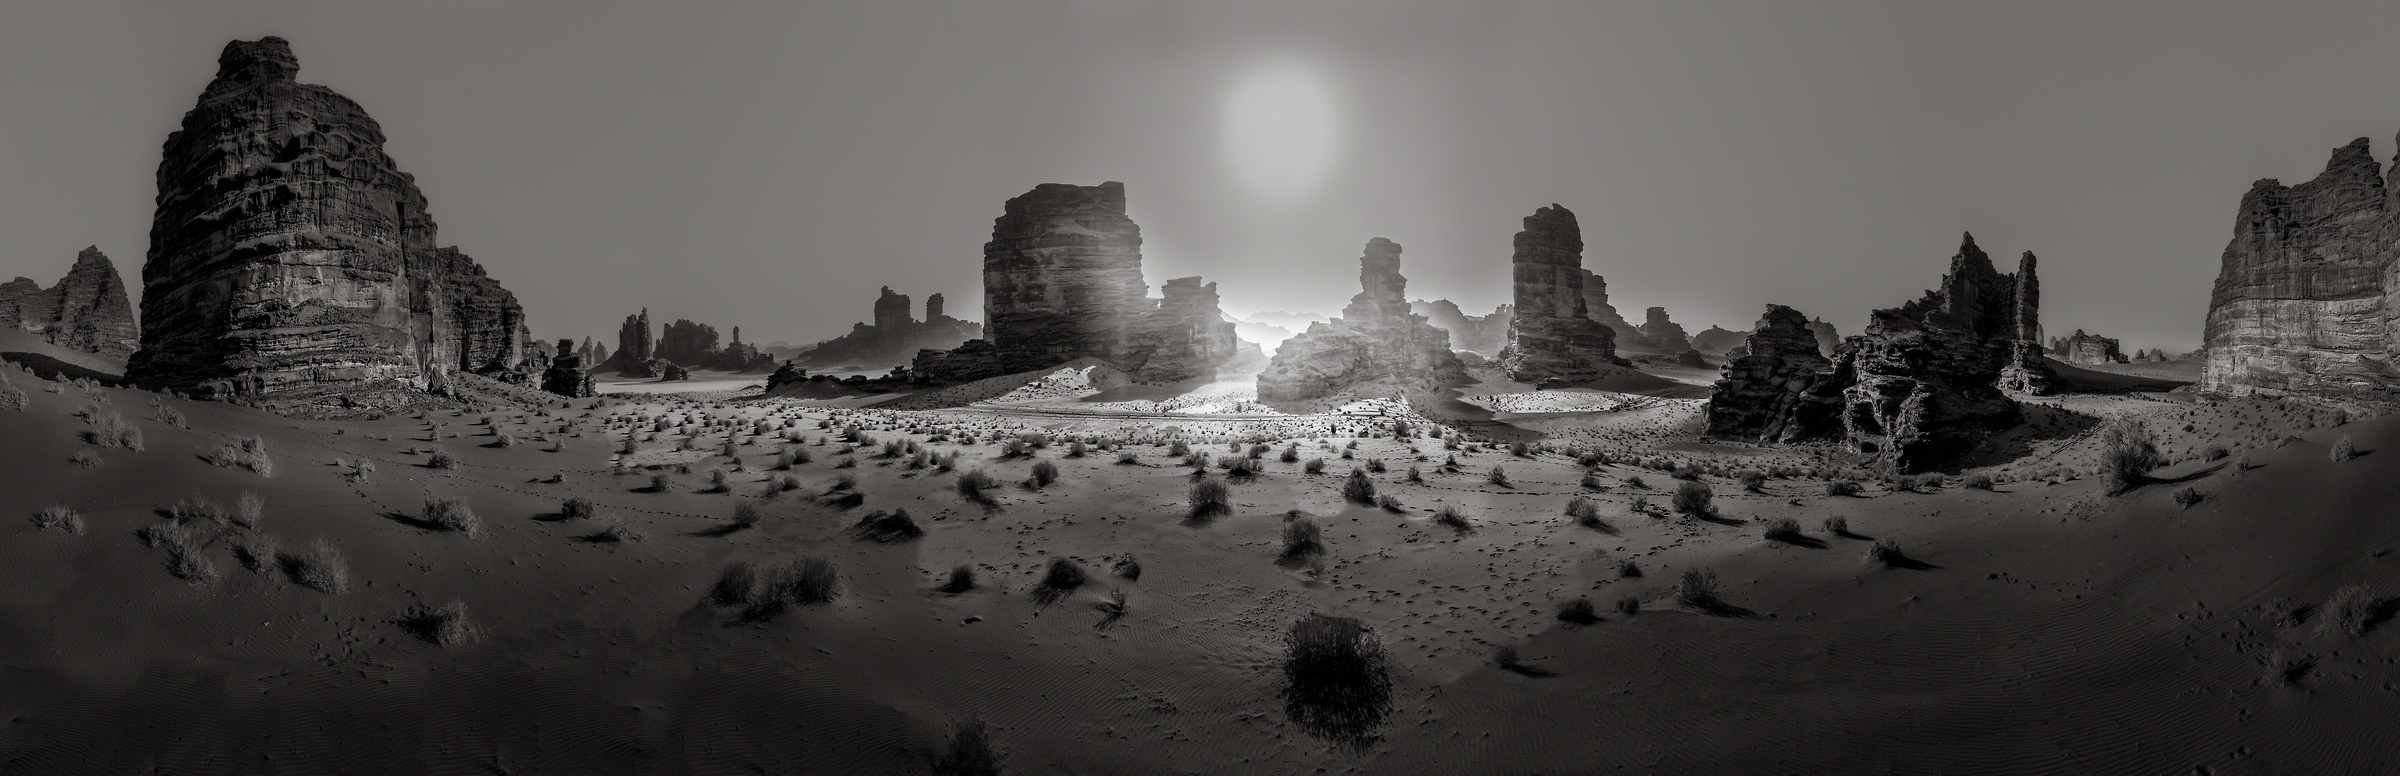 1,025 megapixels! A very high resolution, large-format VAST photo print of the sun in the desert with interesting rock formations; fine art black & white photograph created by Peter Rodger in Tabuk, Saudi Arabia